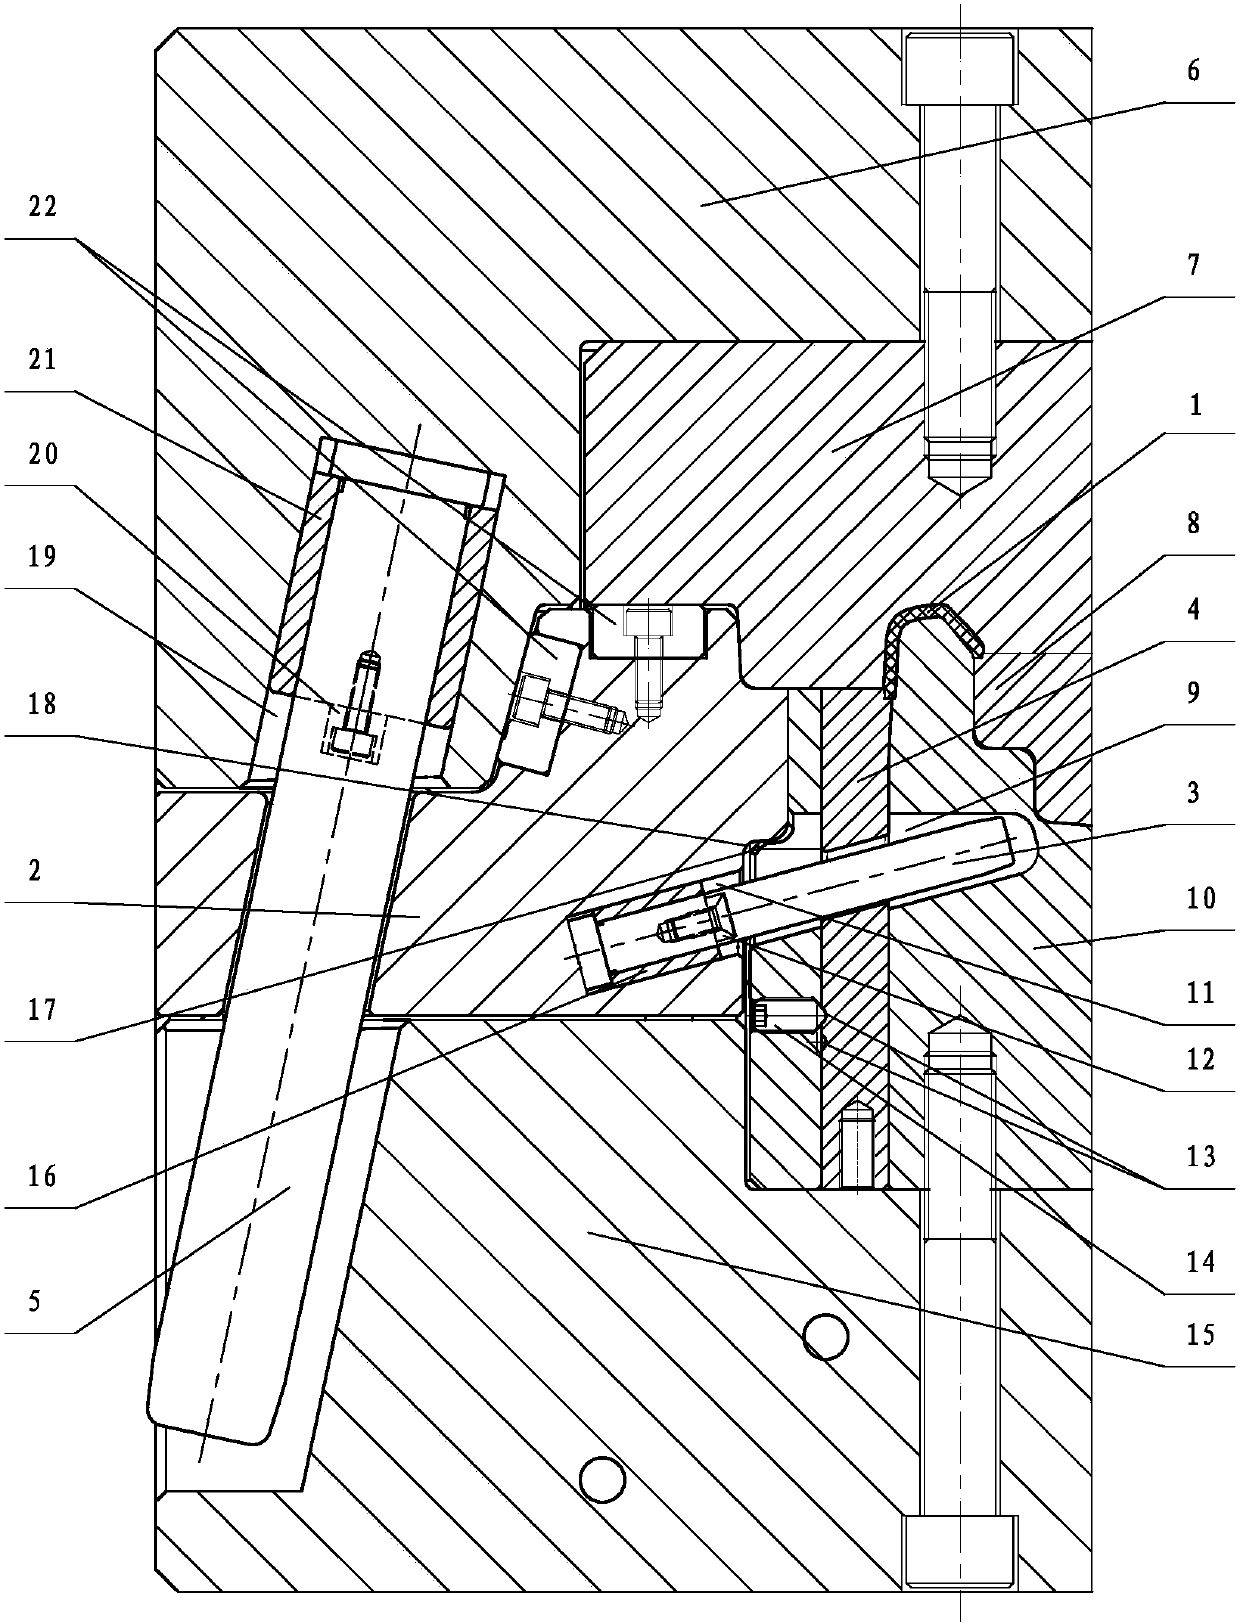 Injection mold ejection mechanism for electroplated parts